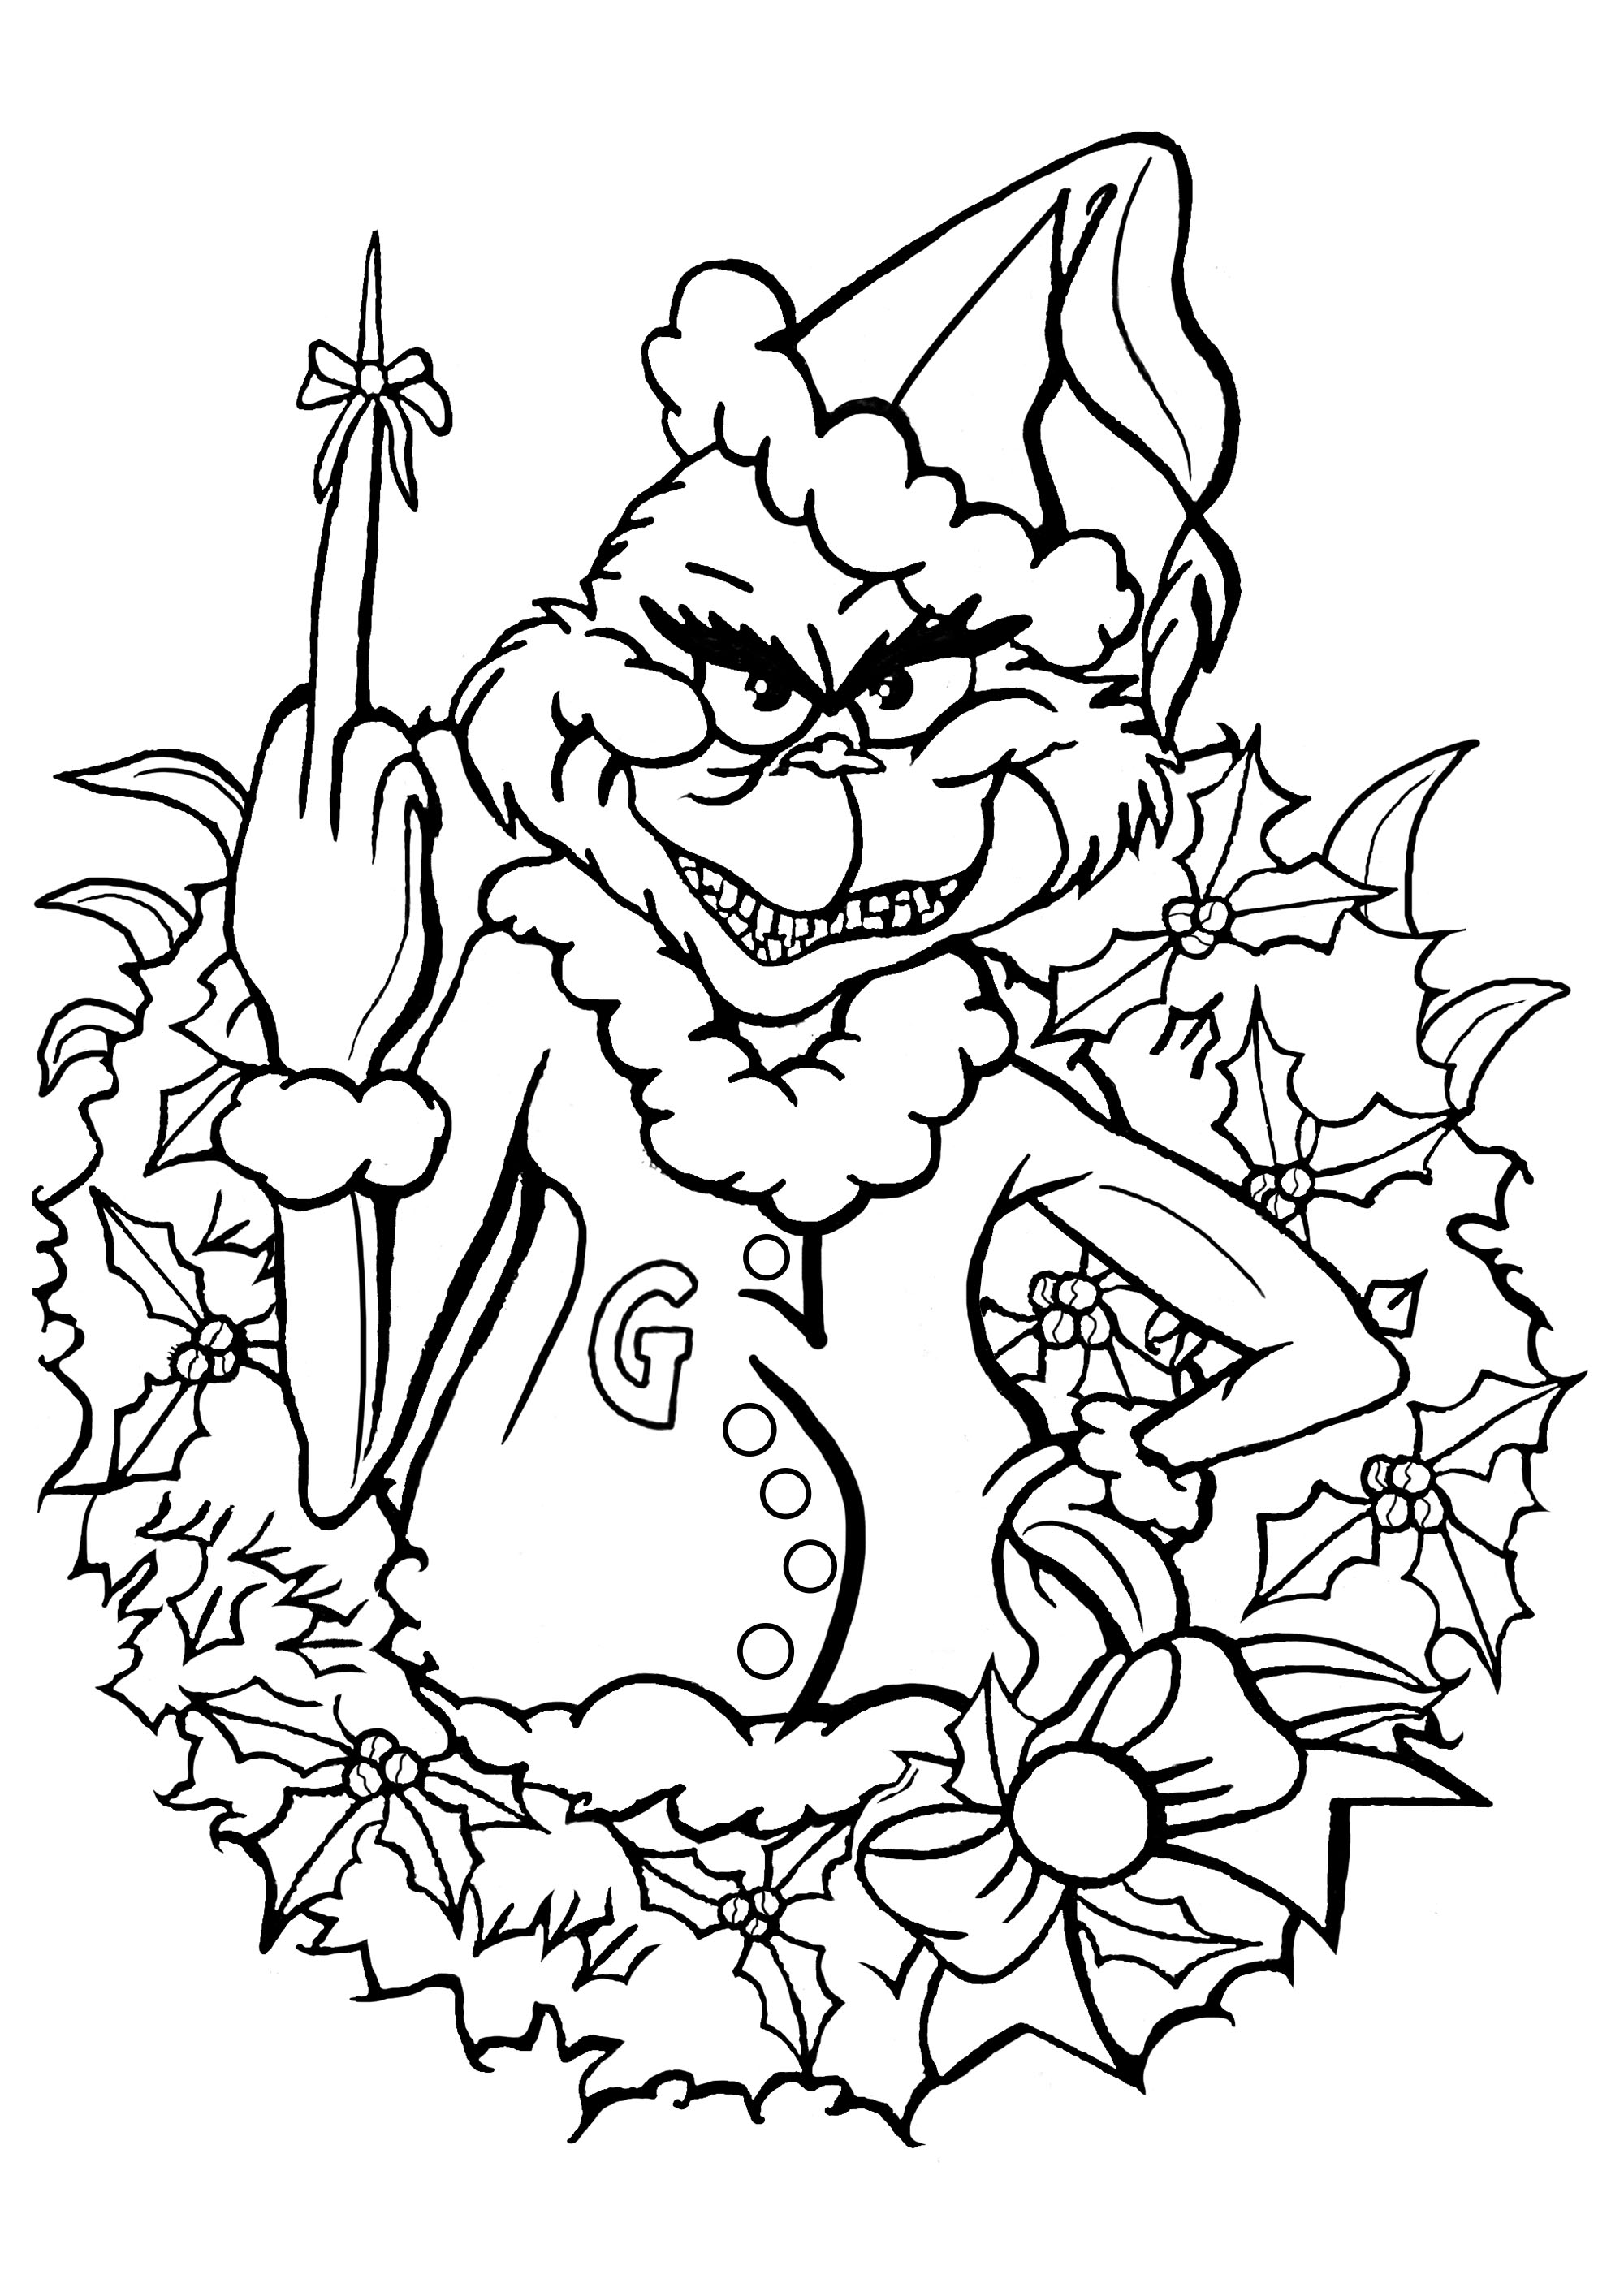 Illumination The Grinch Coloring Pages - Free Coloring Pages